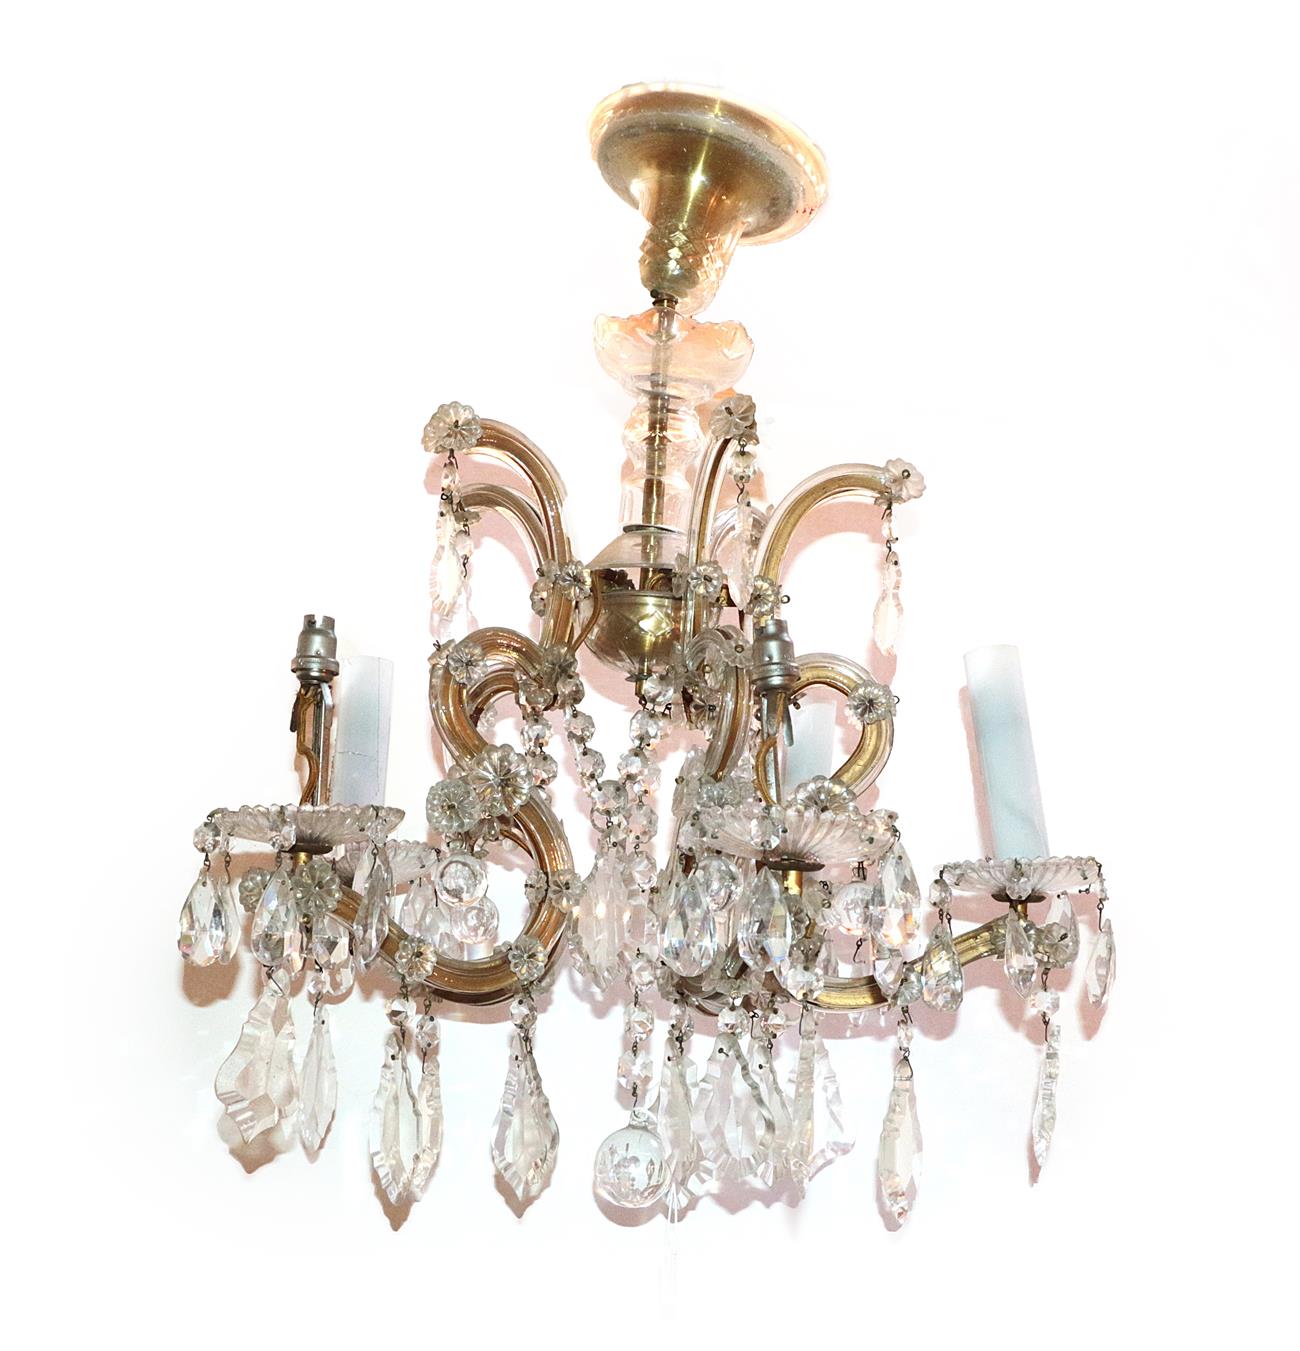 Lot 76 - A Cut Glass Five-Light Chandelier, with baluster stem, scroll branches and fluted sconces hung with